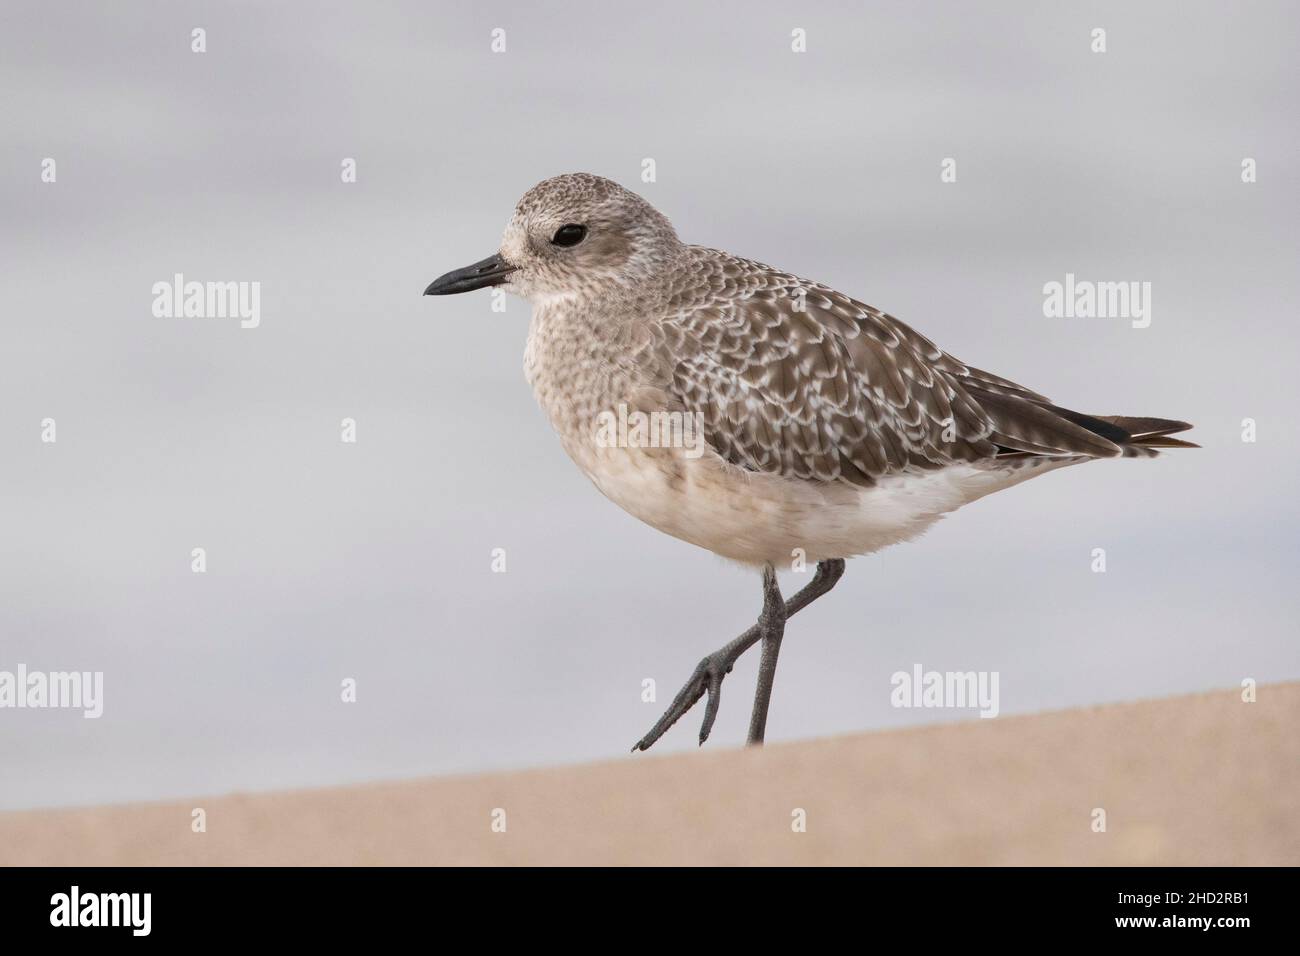 Grey Plover (Pluvialis squatarola), side view of an adult in winter plumage standing on the sand, Campania, Italy Stock Photo